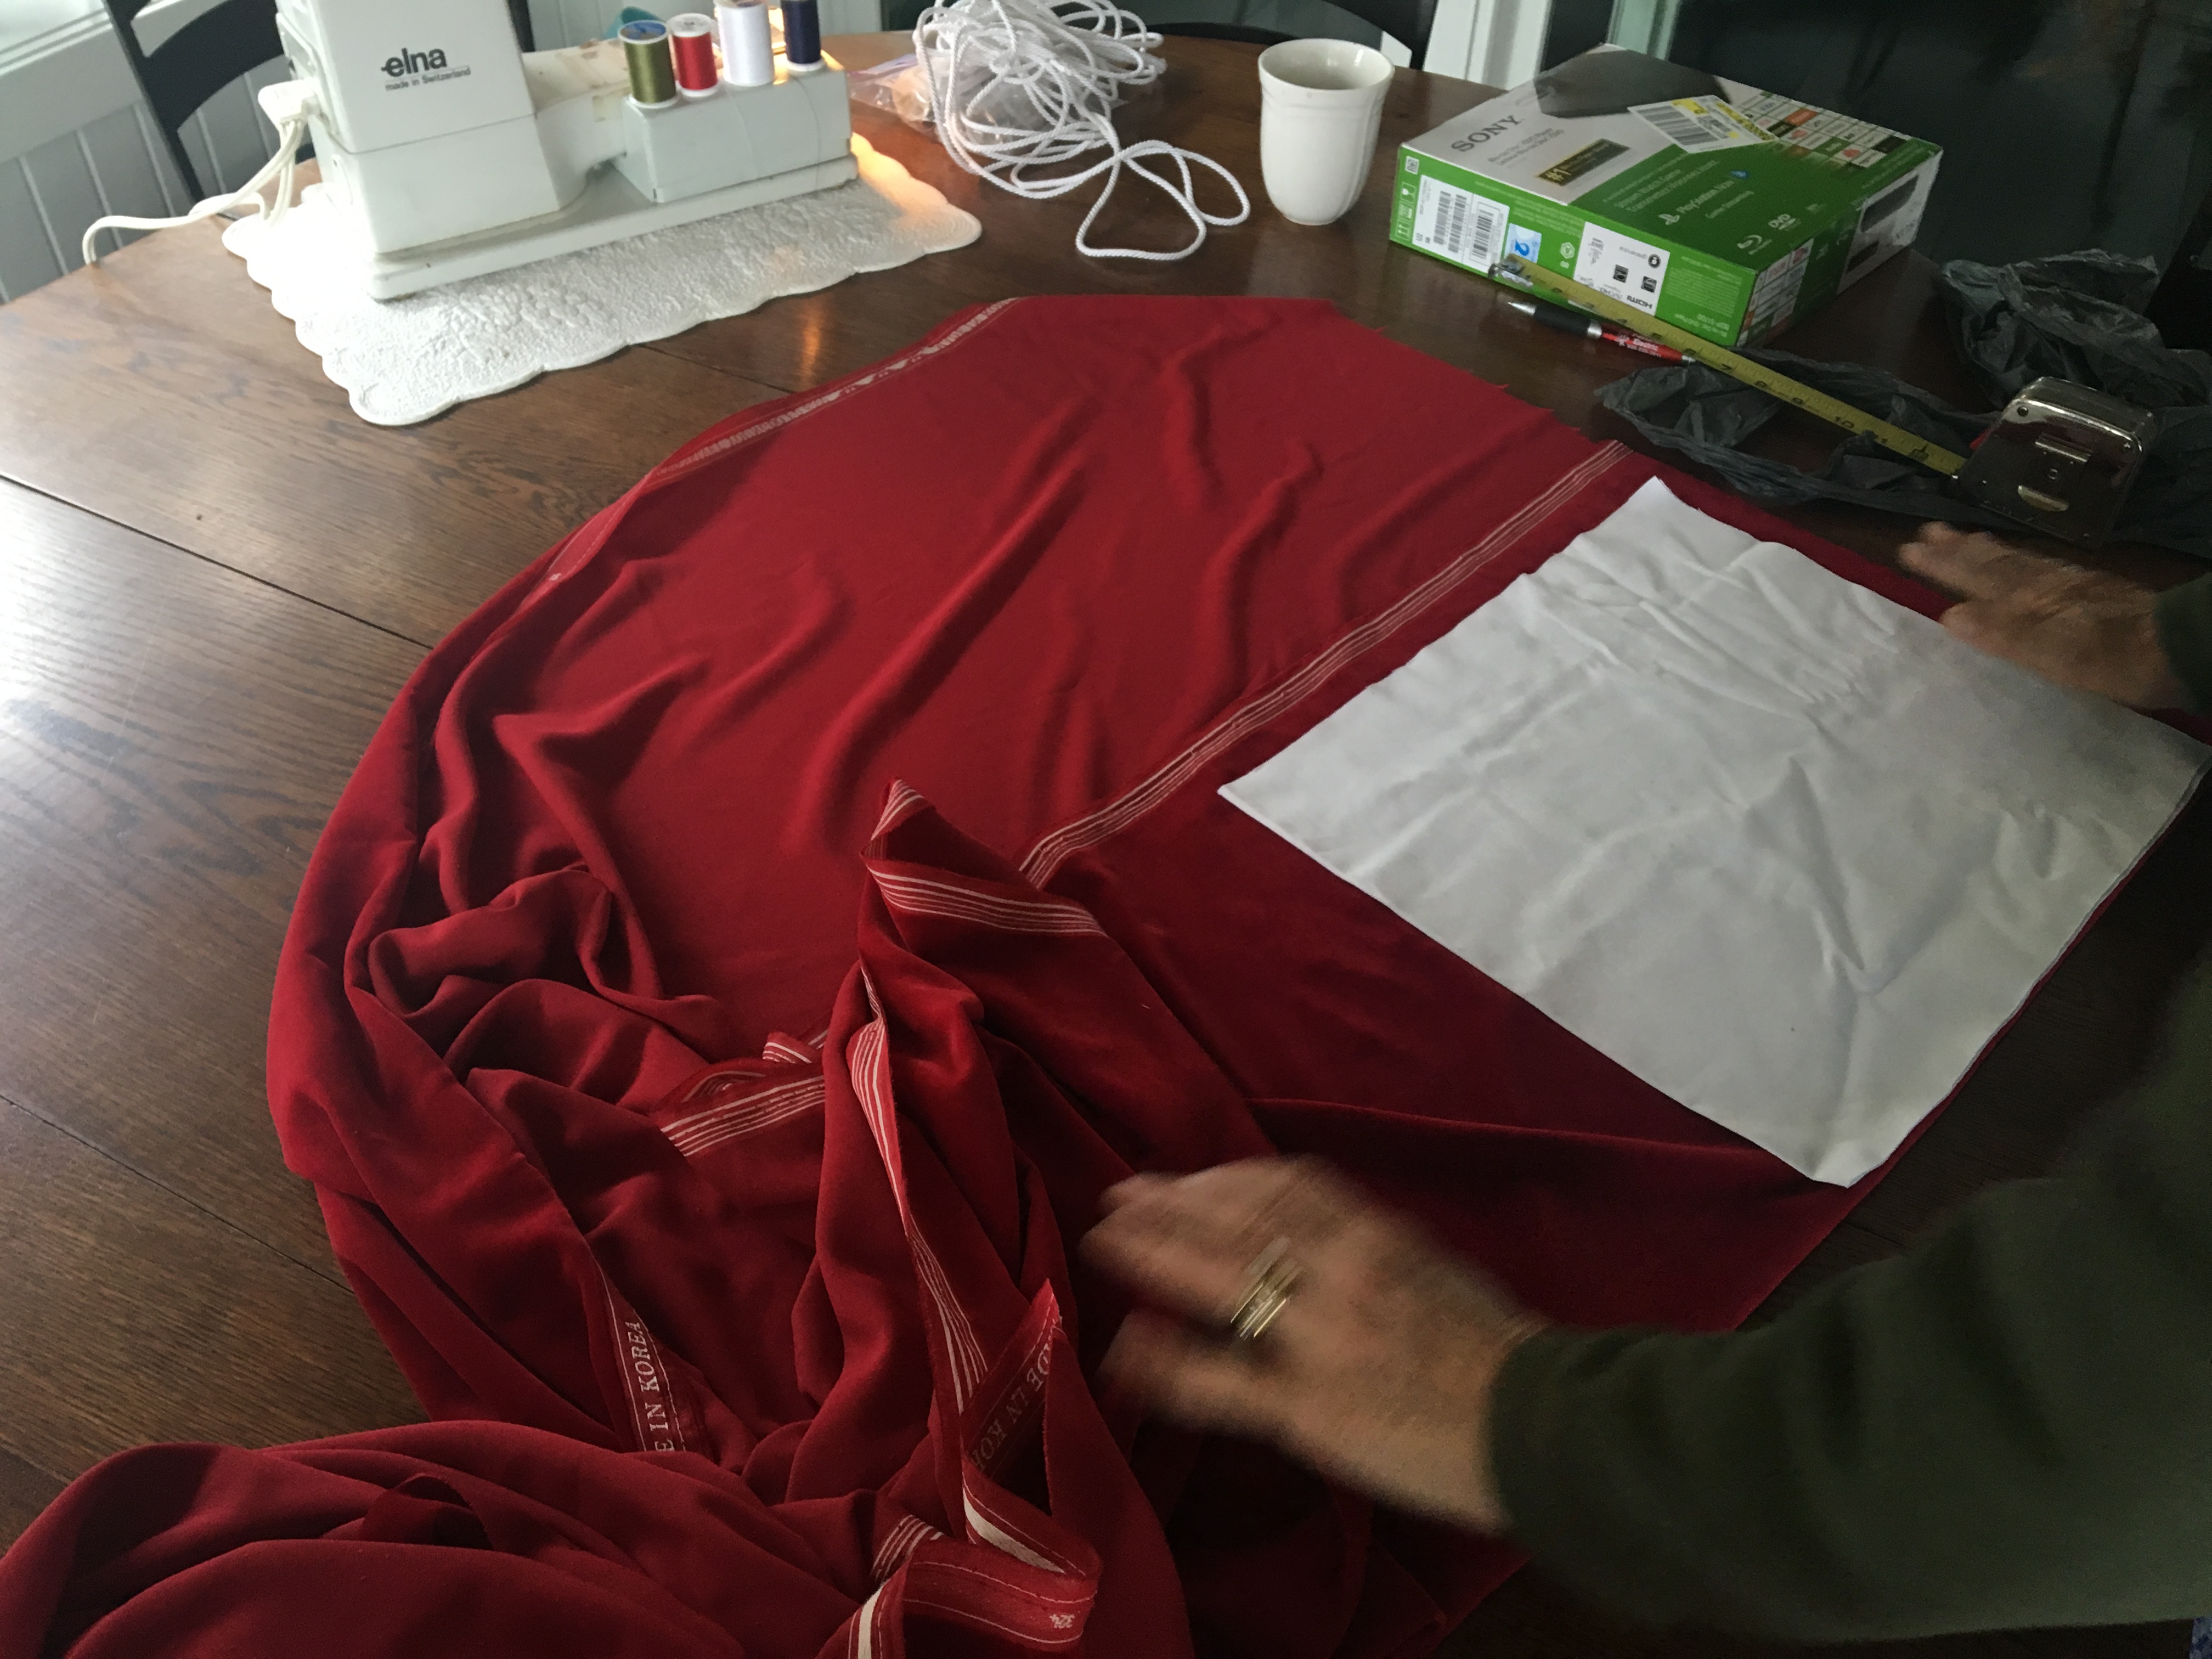 Measuring and cutting the velvet